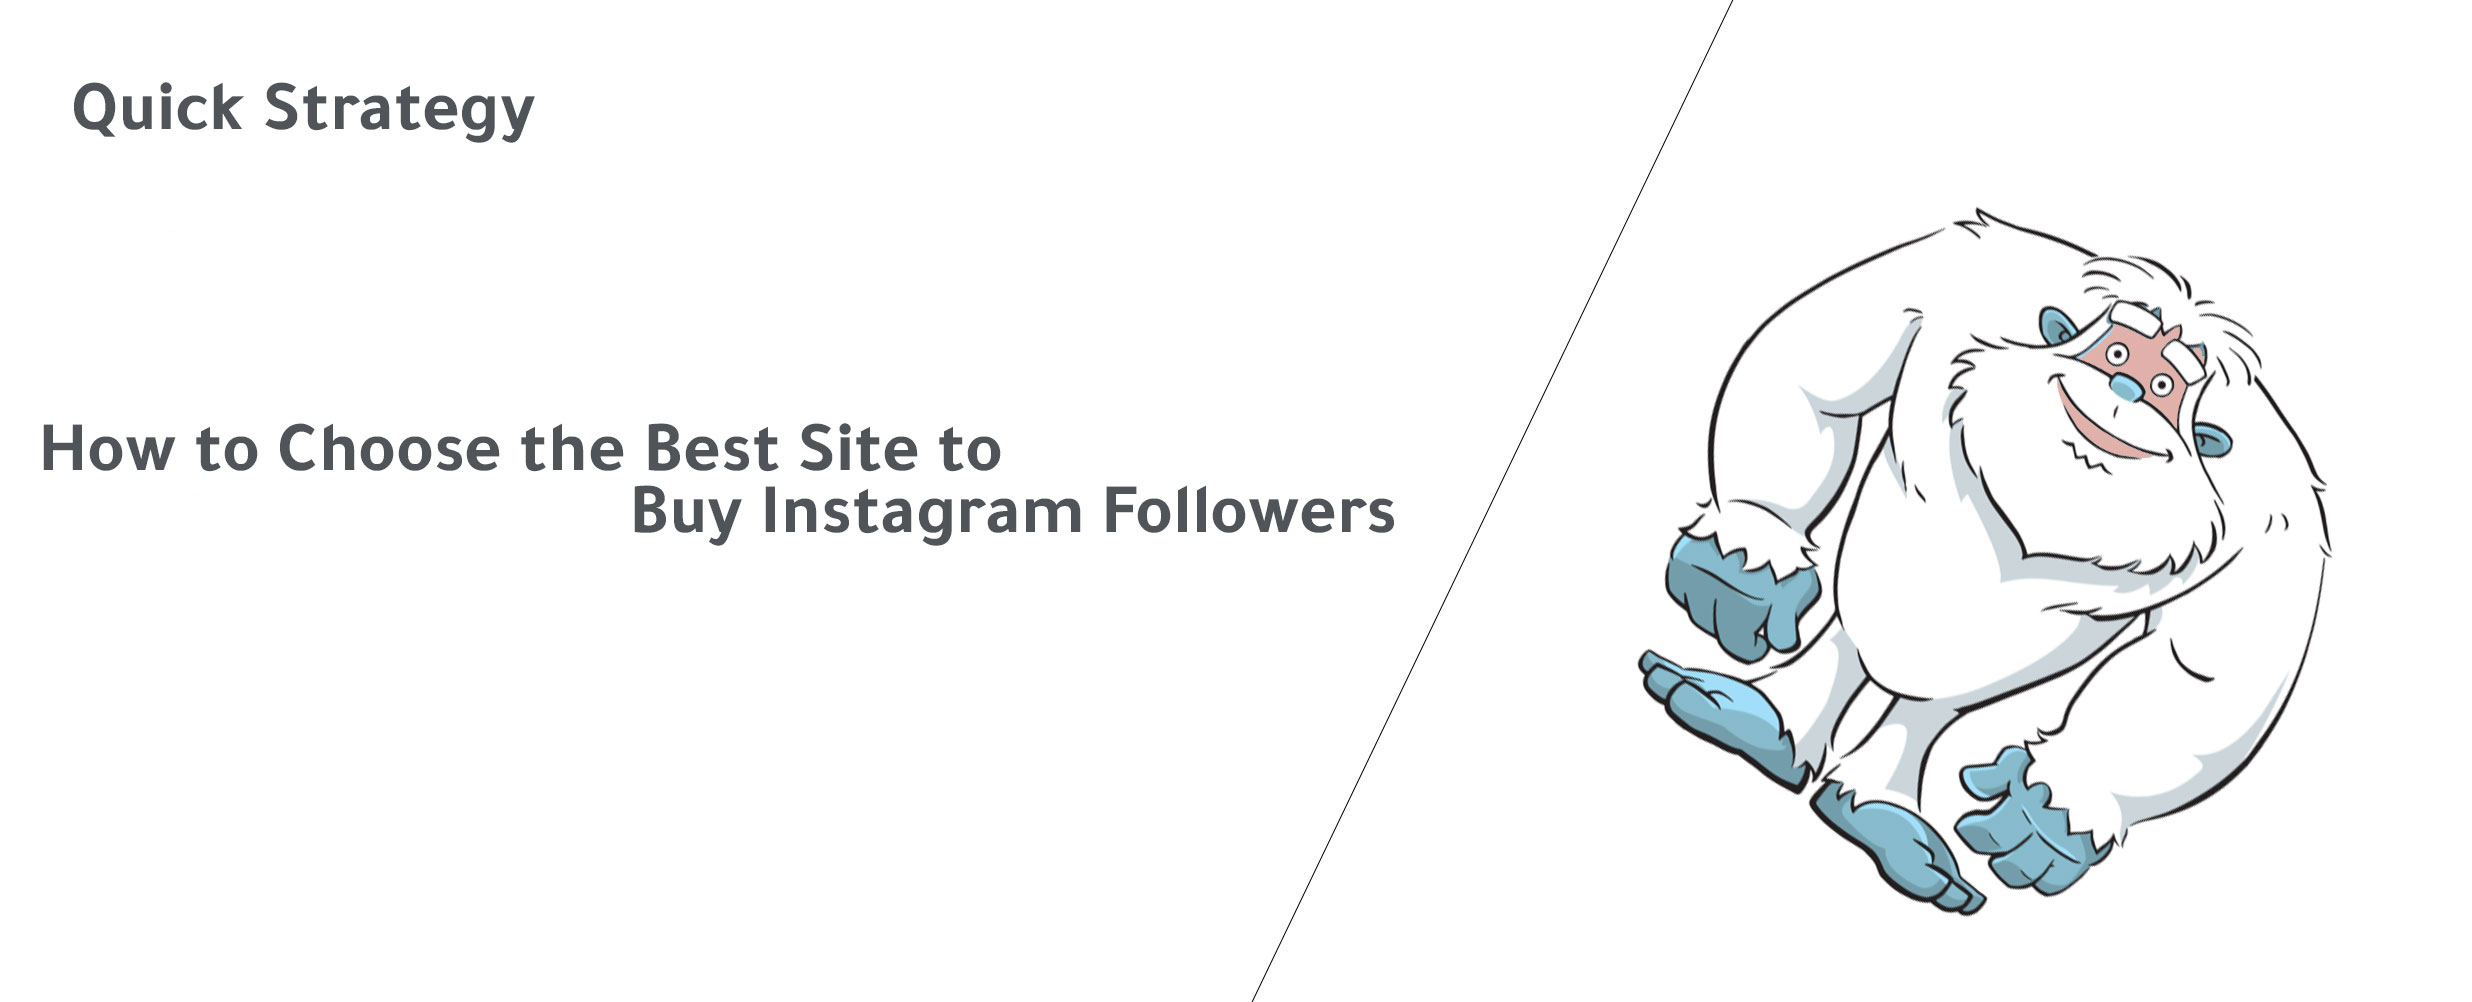 How to Choose the Best Site to Buy Instagram Followers